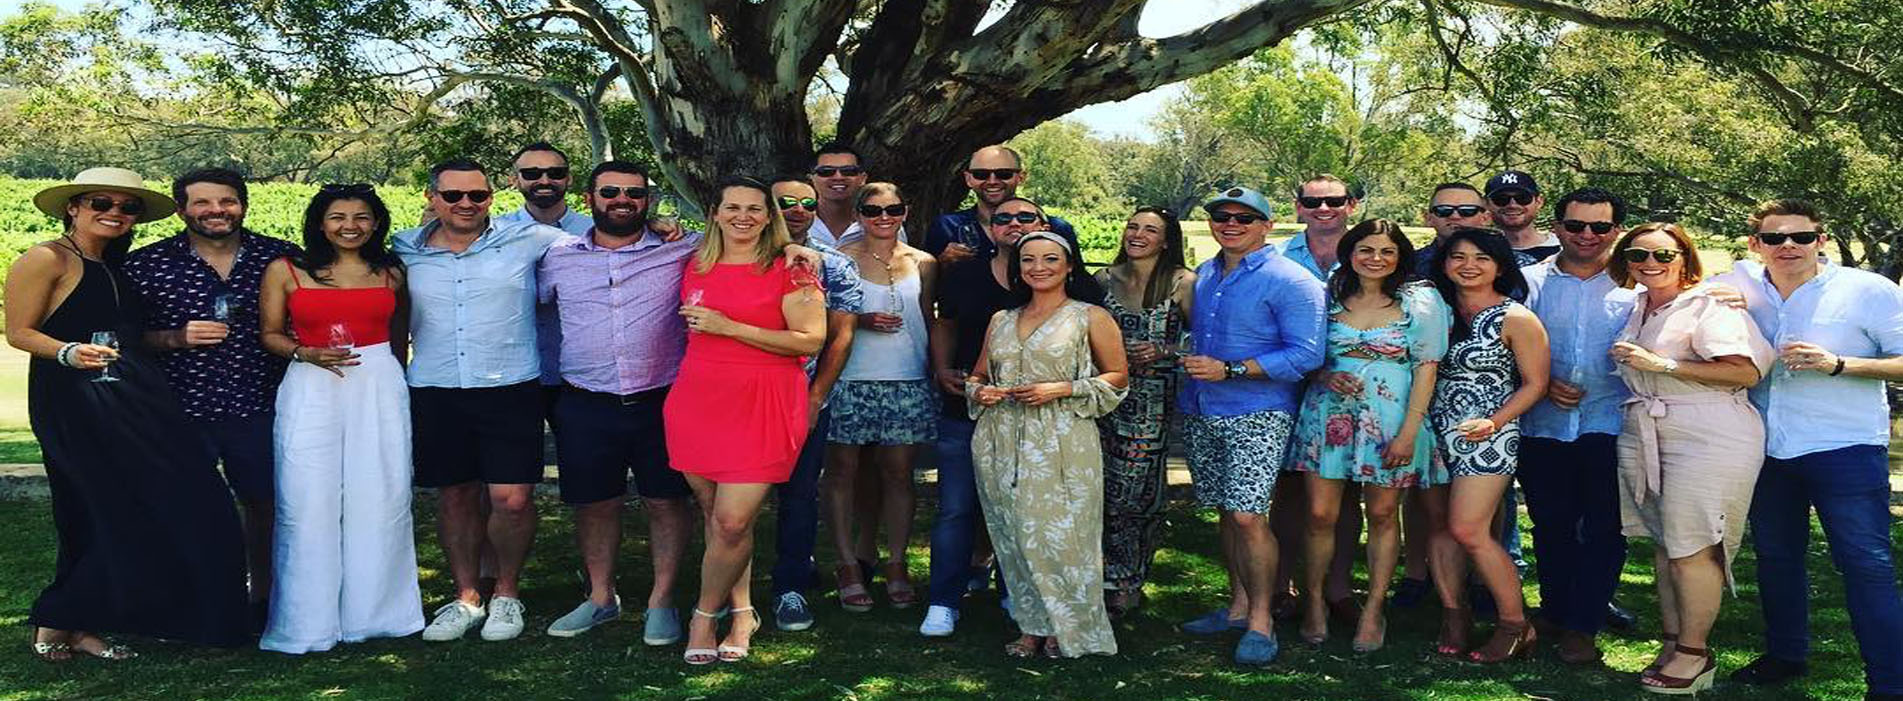 SWAN VALLEY WINERY TOUR GROUP PERTH WA